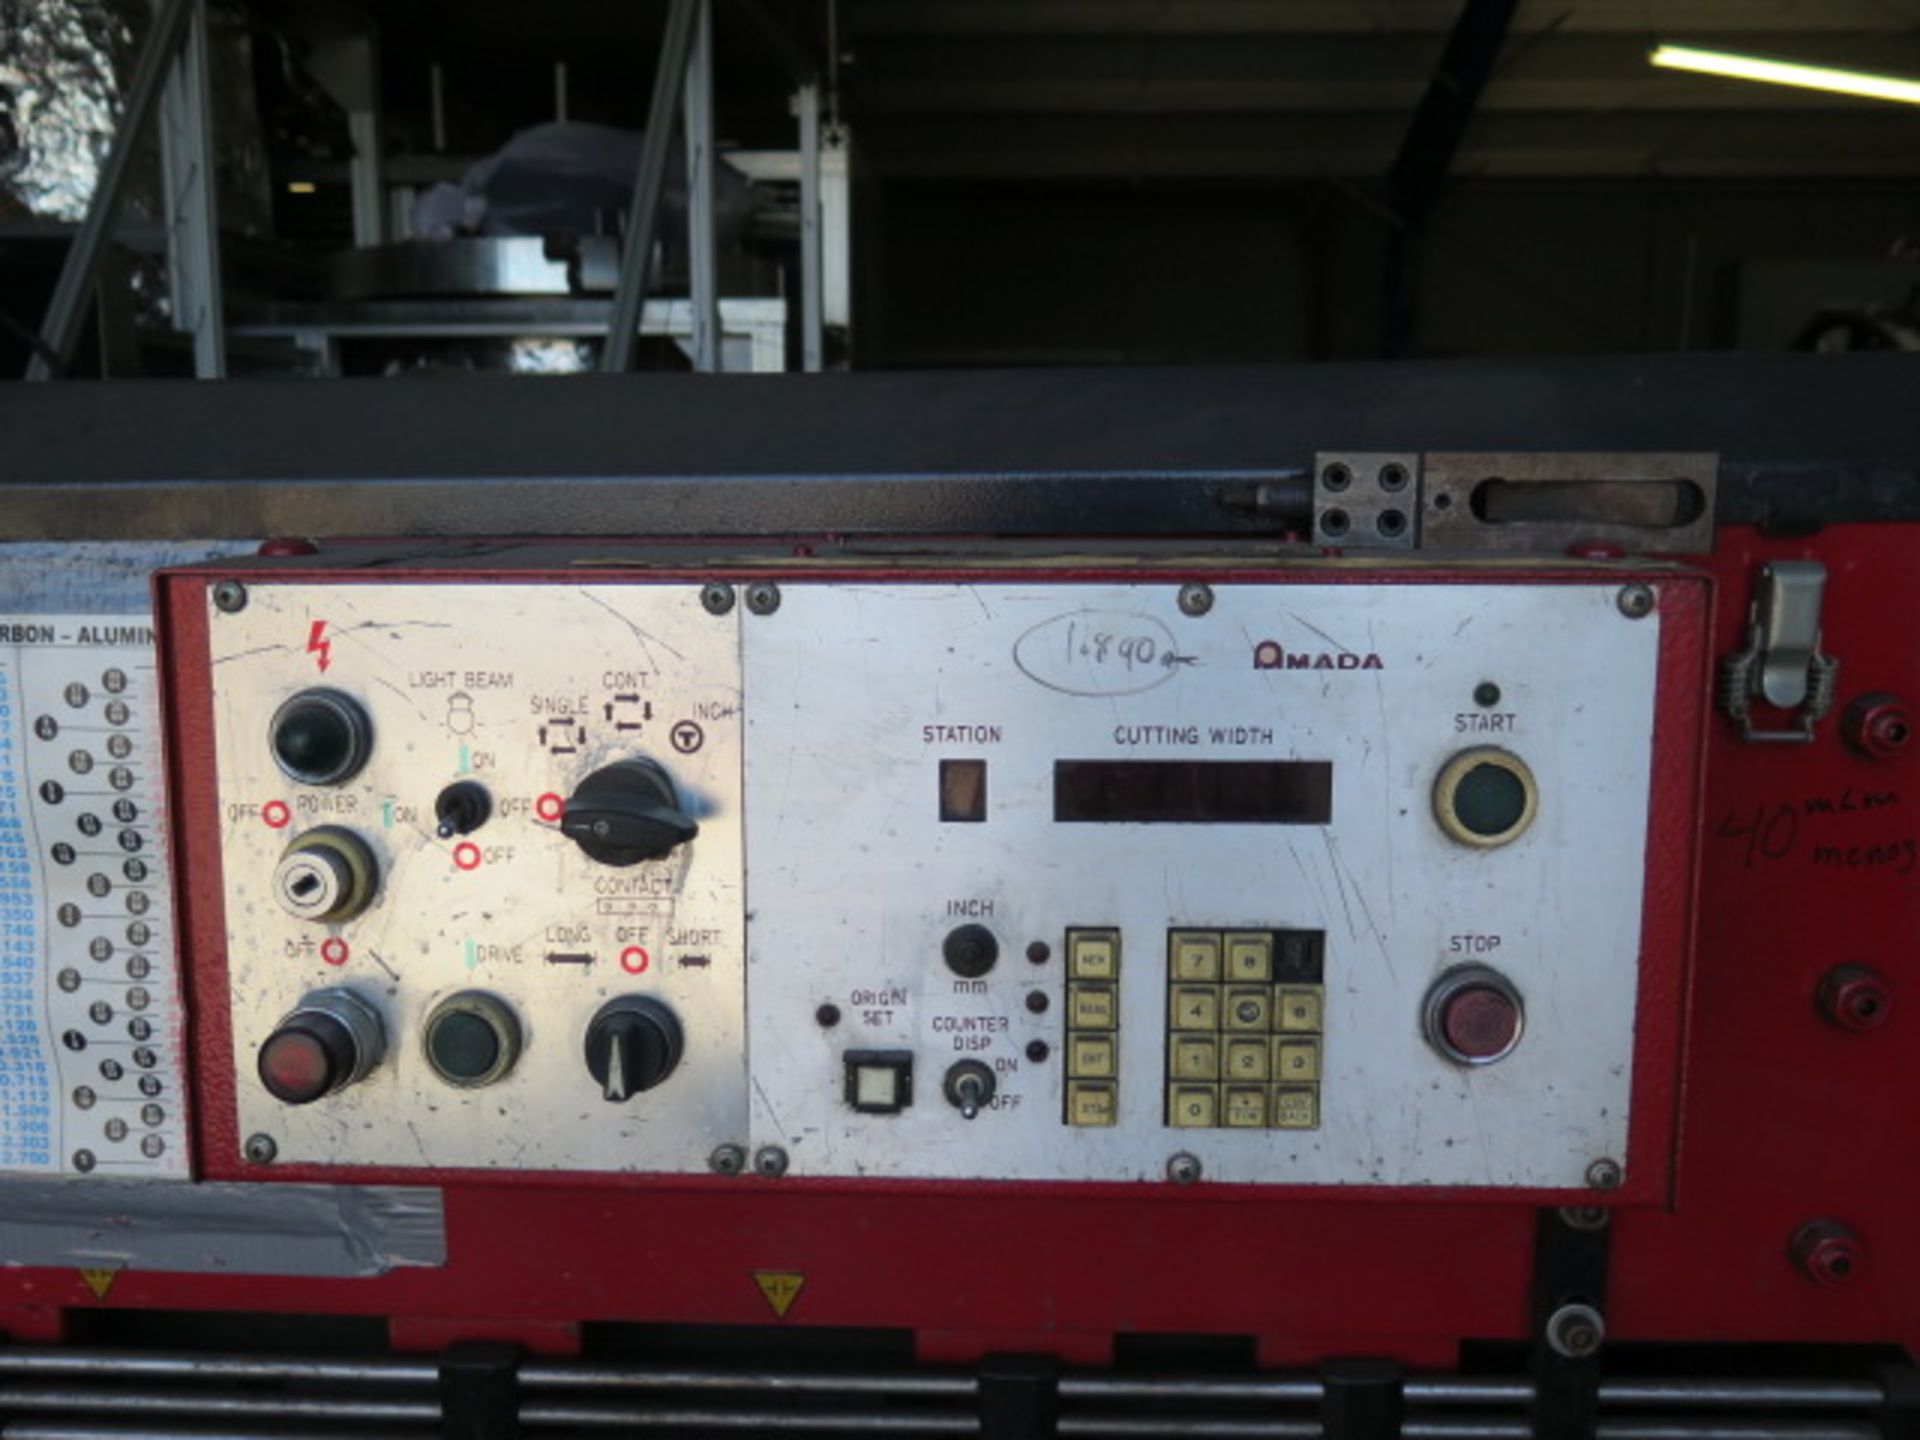 Amada M-2060 ¼” x 78” Power Shear s/n 20600705 w/ Amada Controls and BG, 88” Sq Arm, SOLD AS IS - Image 10 of 12